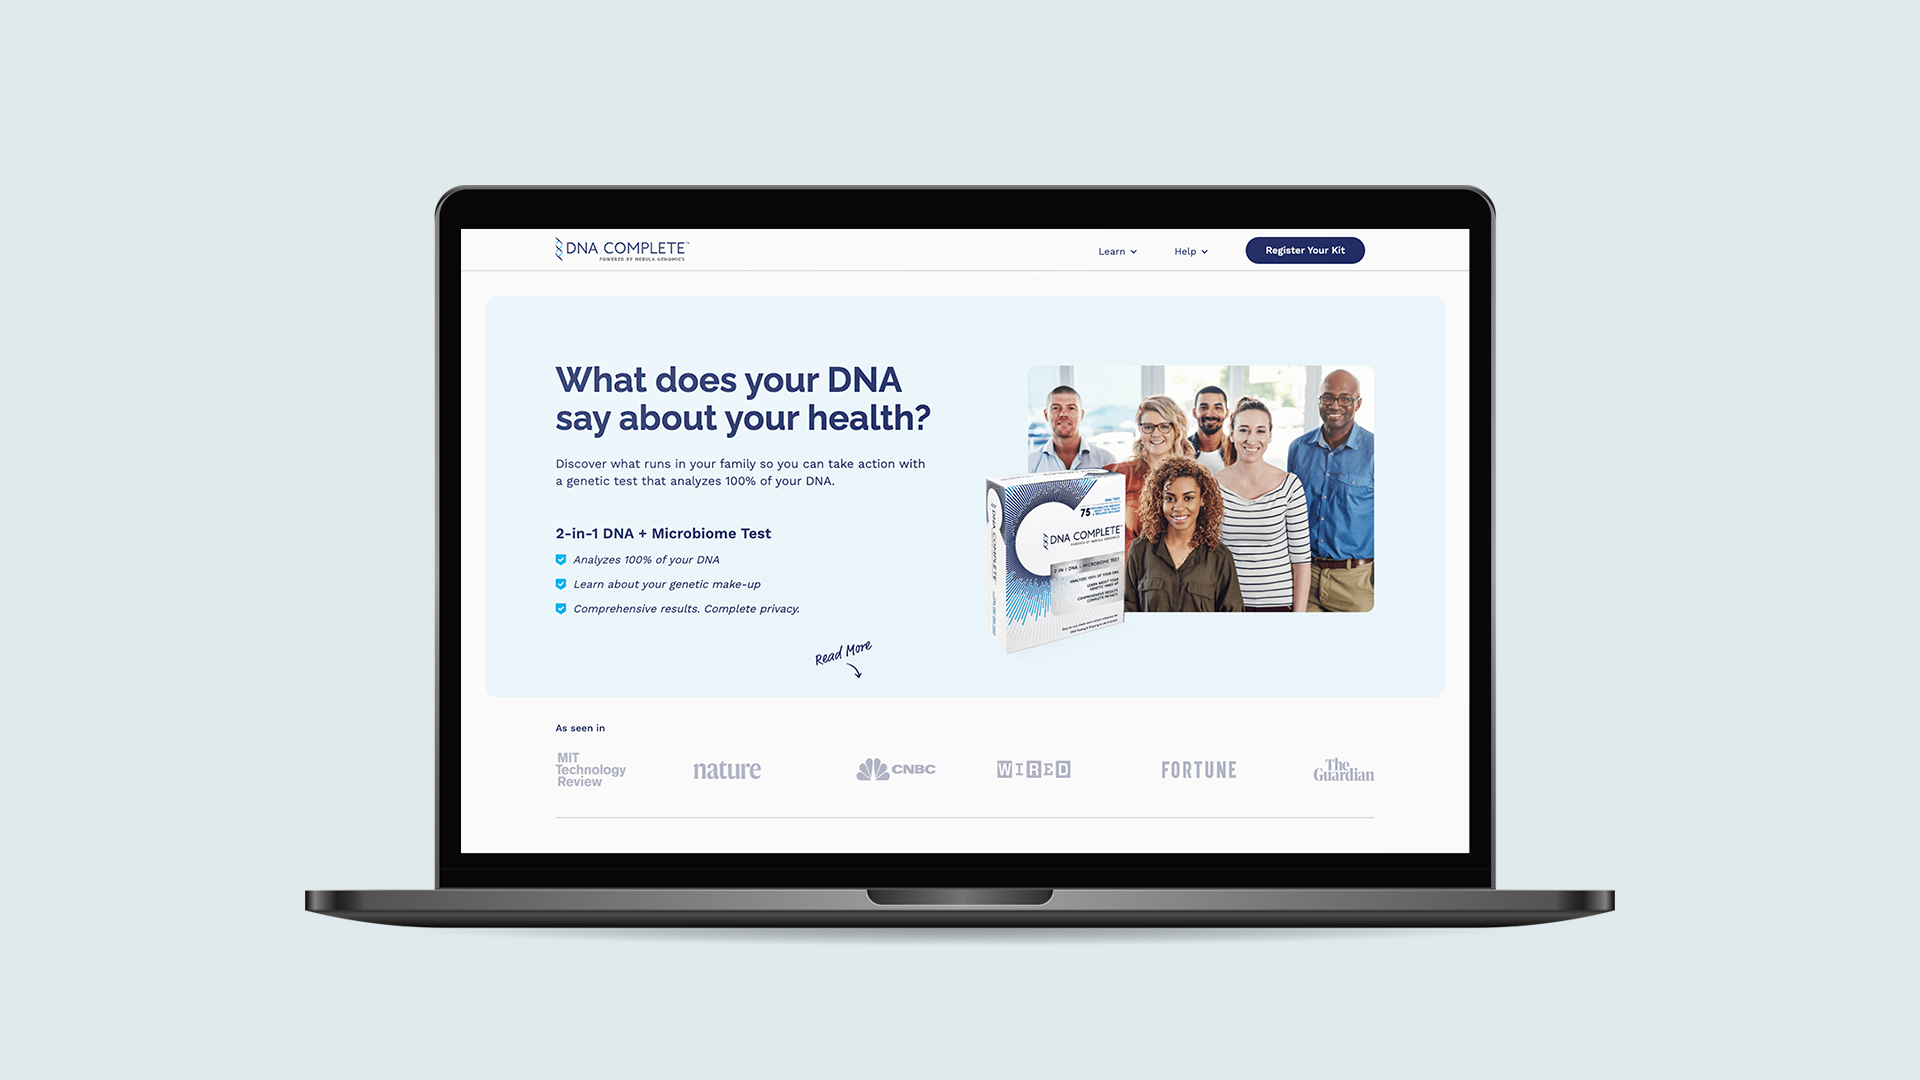 DNA Complete - Home Page Concept Image.